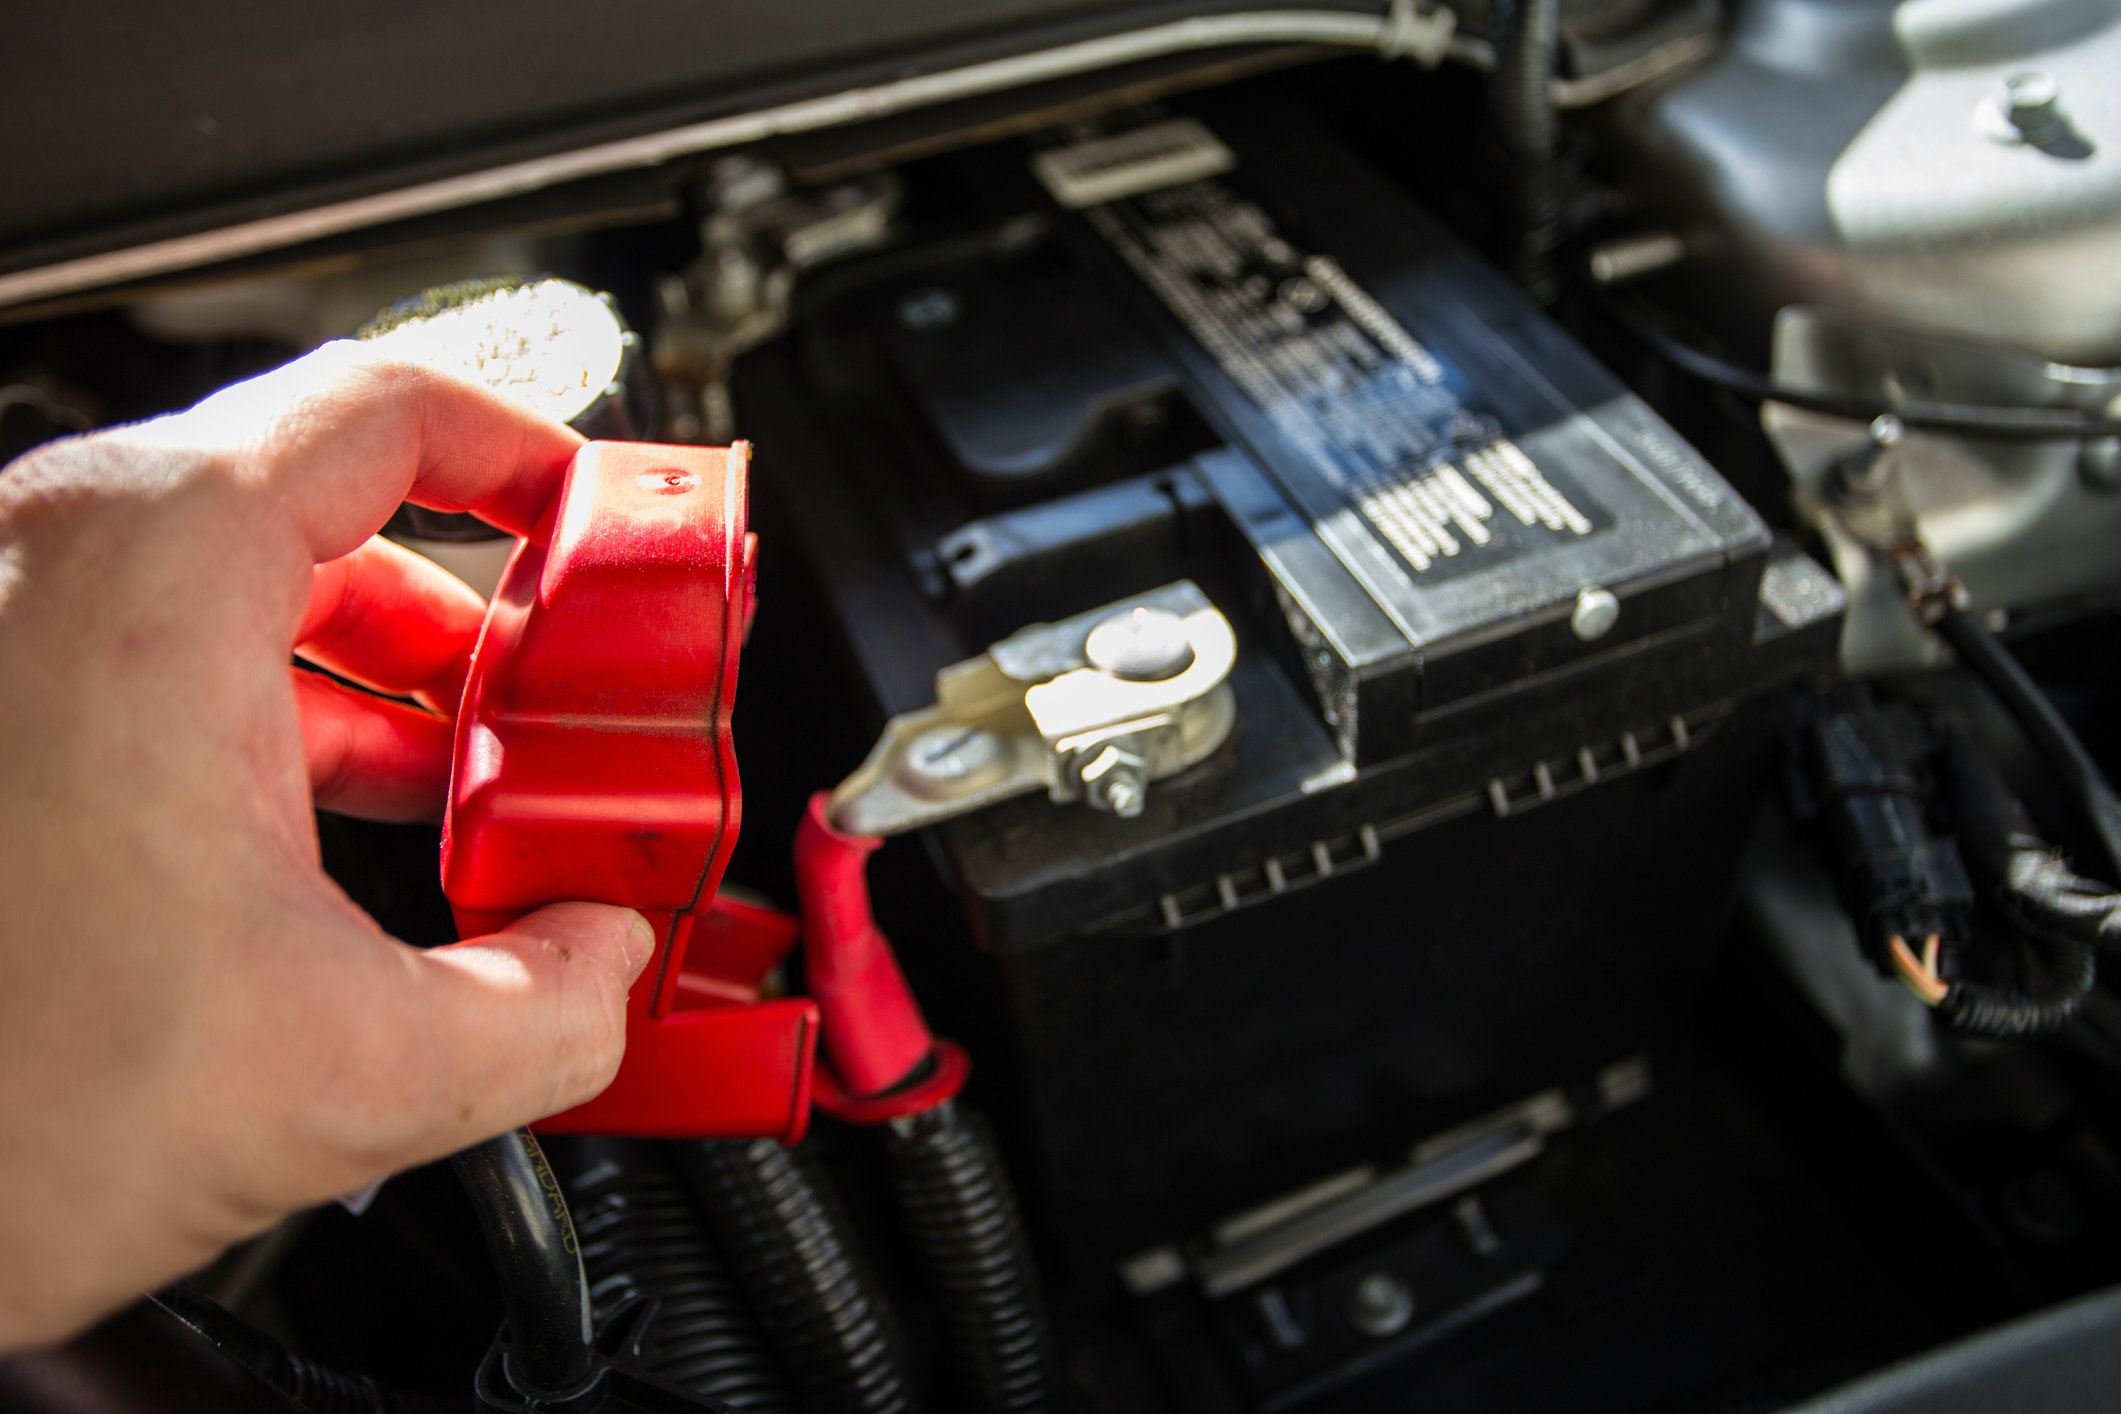 What fluid can a car battery be filled with?